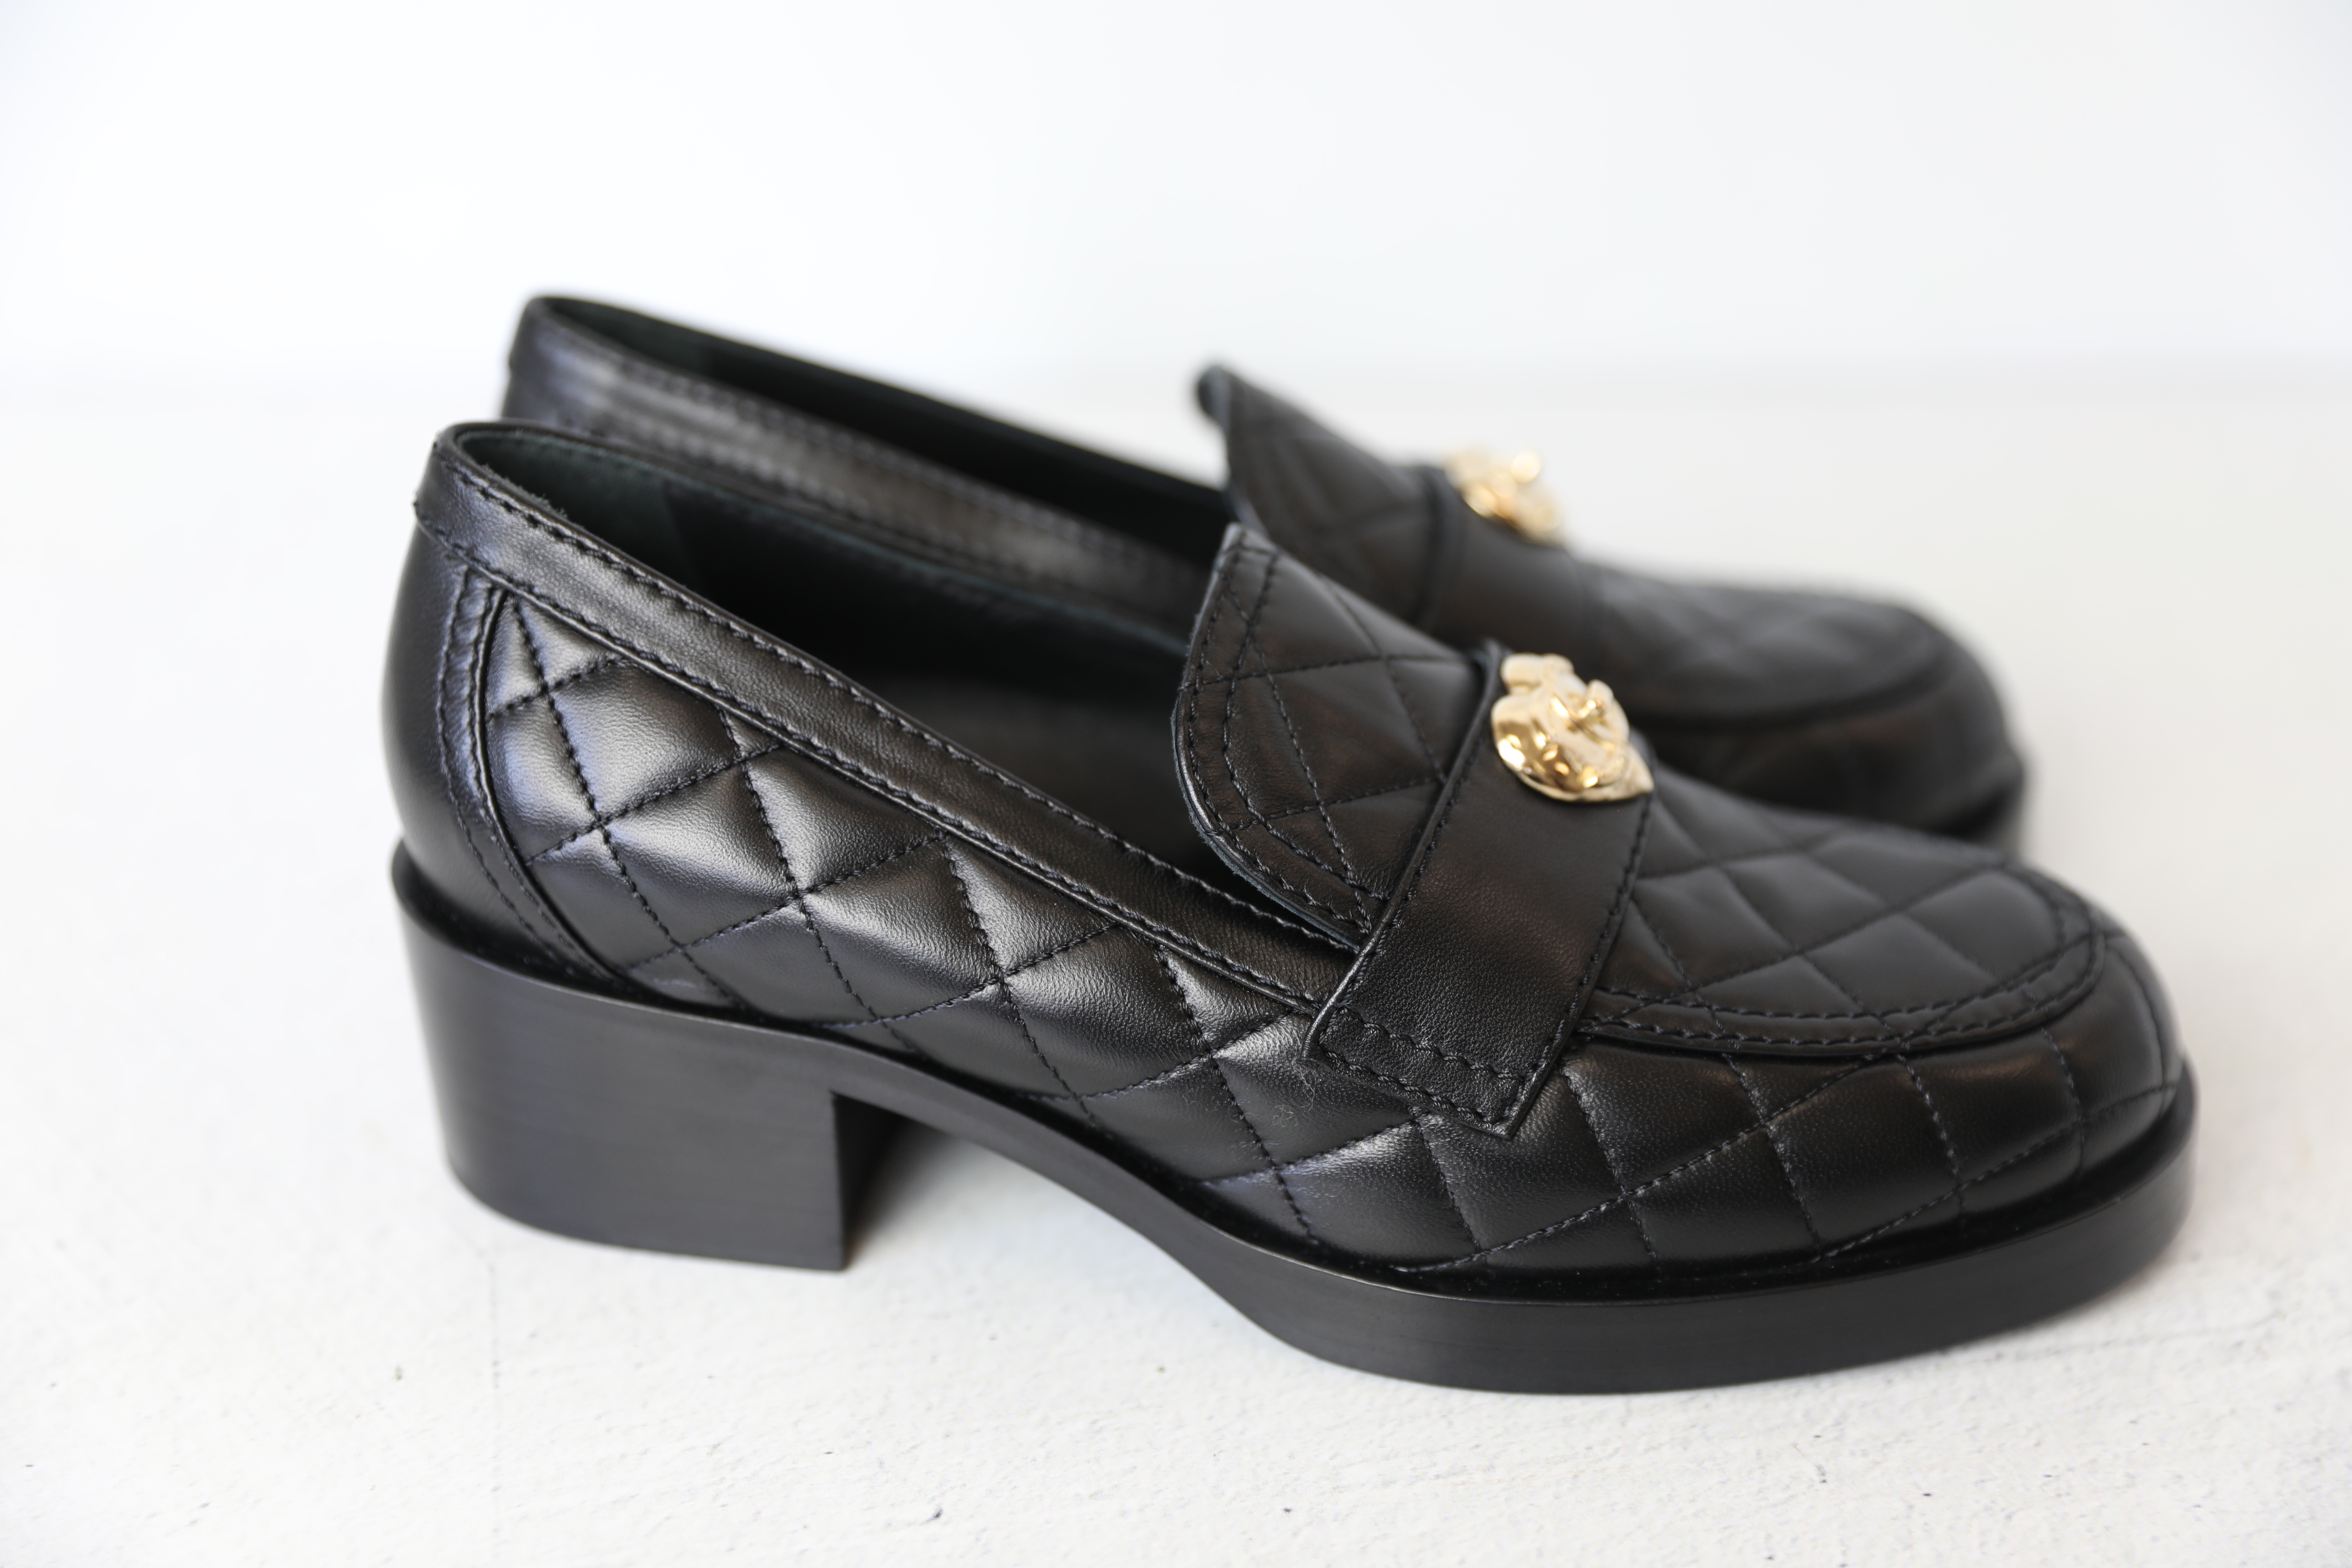 Chanel - Black Leather Loafer Pumps w/ Quilted Detail 6.5 – Current Boutique